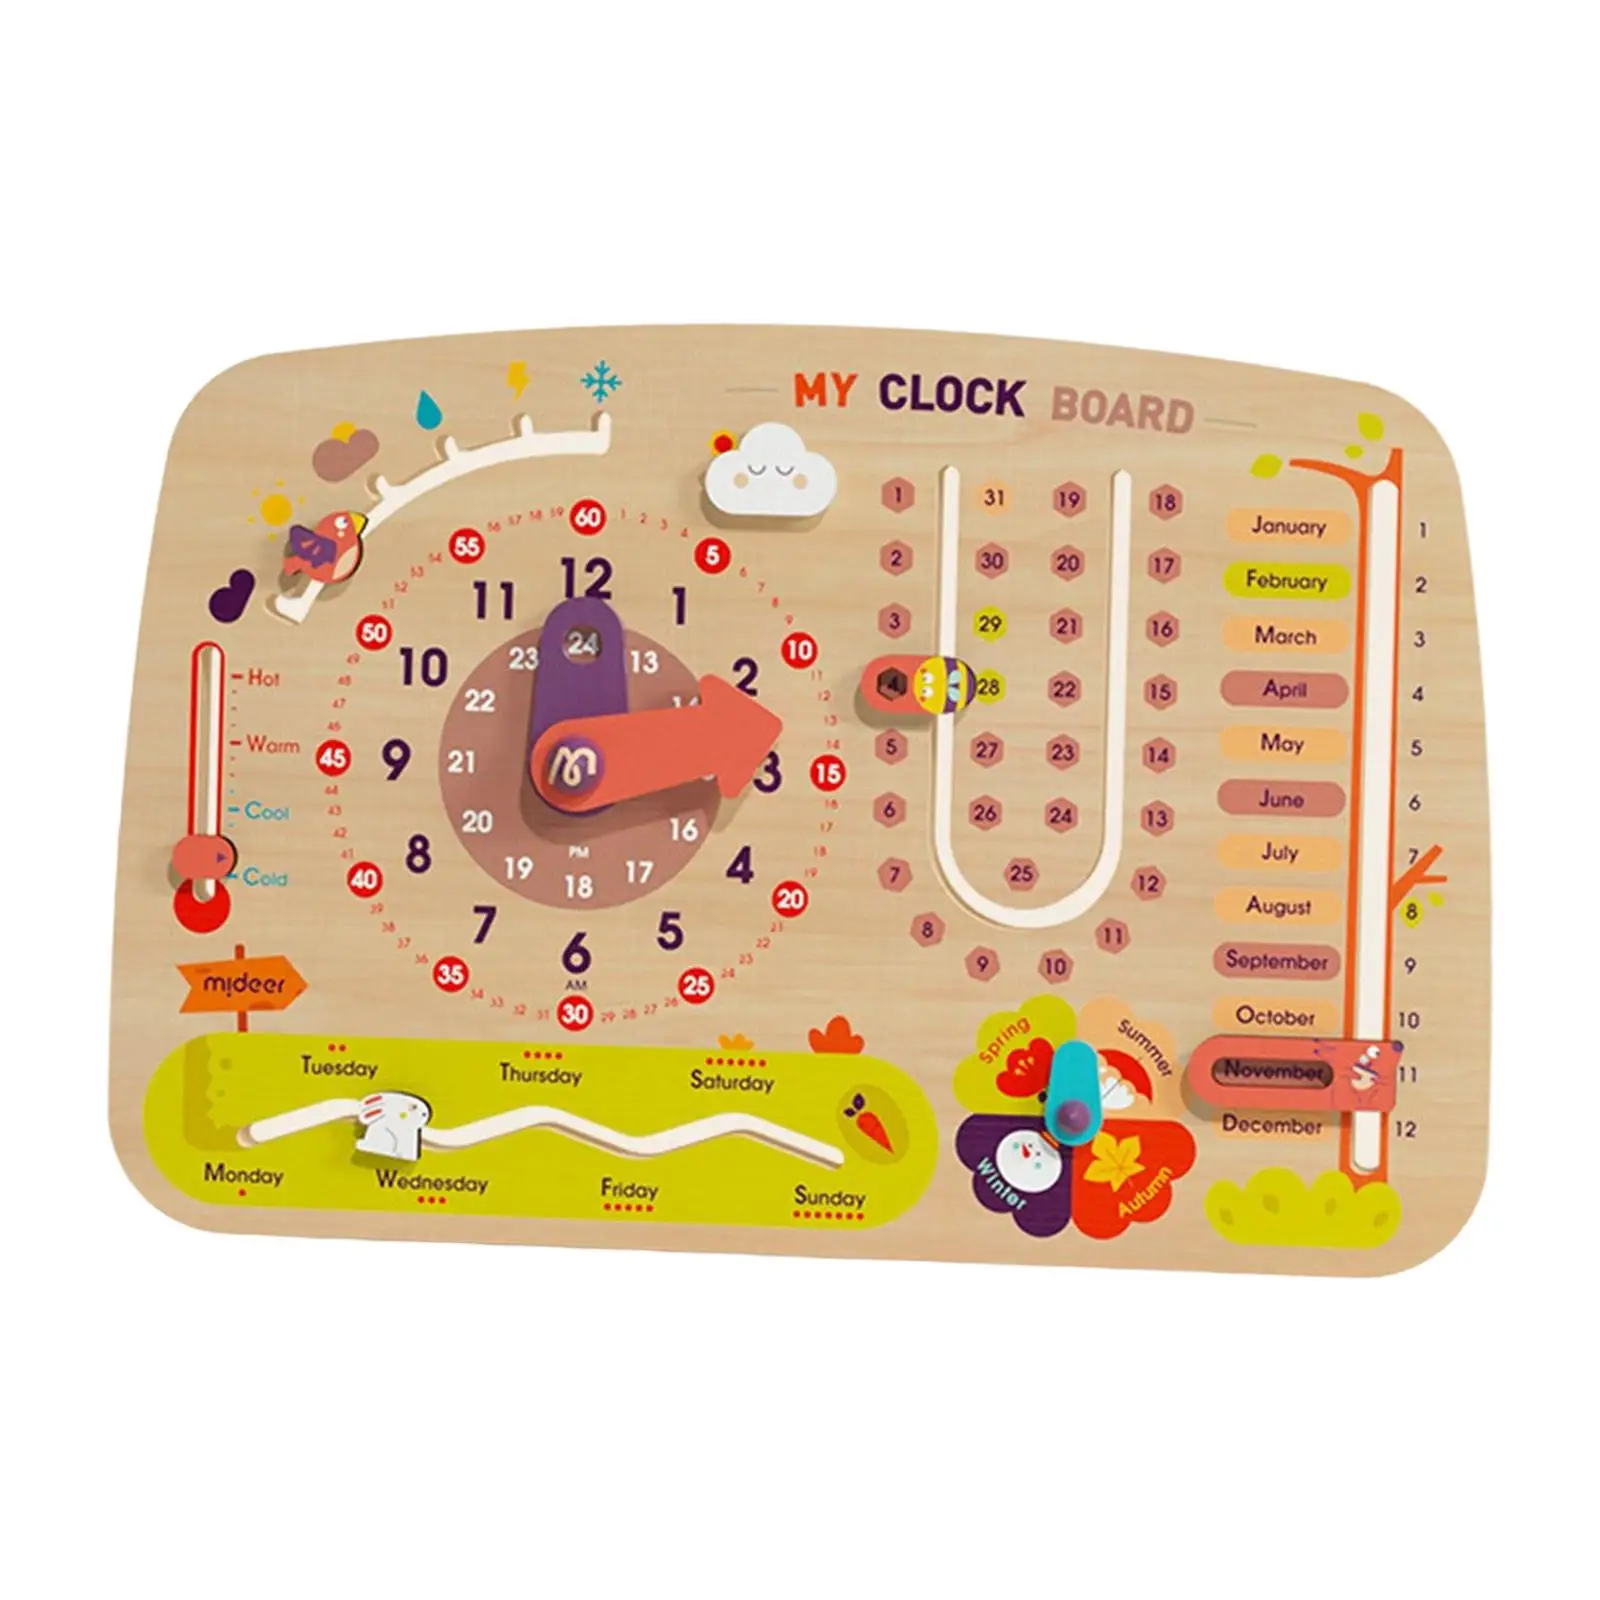 Kids Clock Calendar Teaching Clock Learning Materials for Kids Holiday Gifts